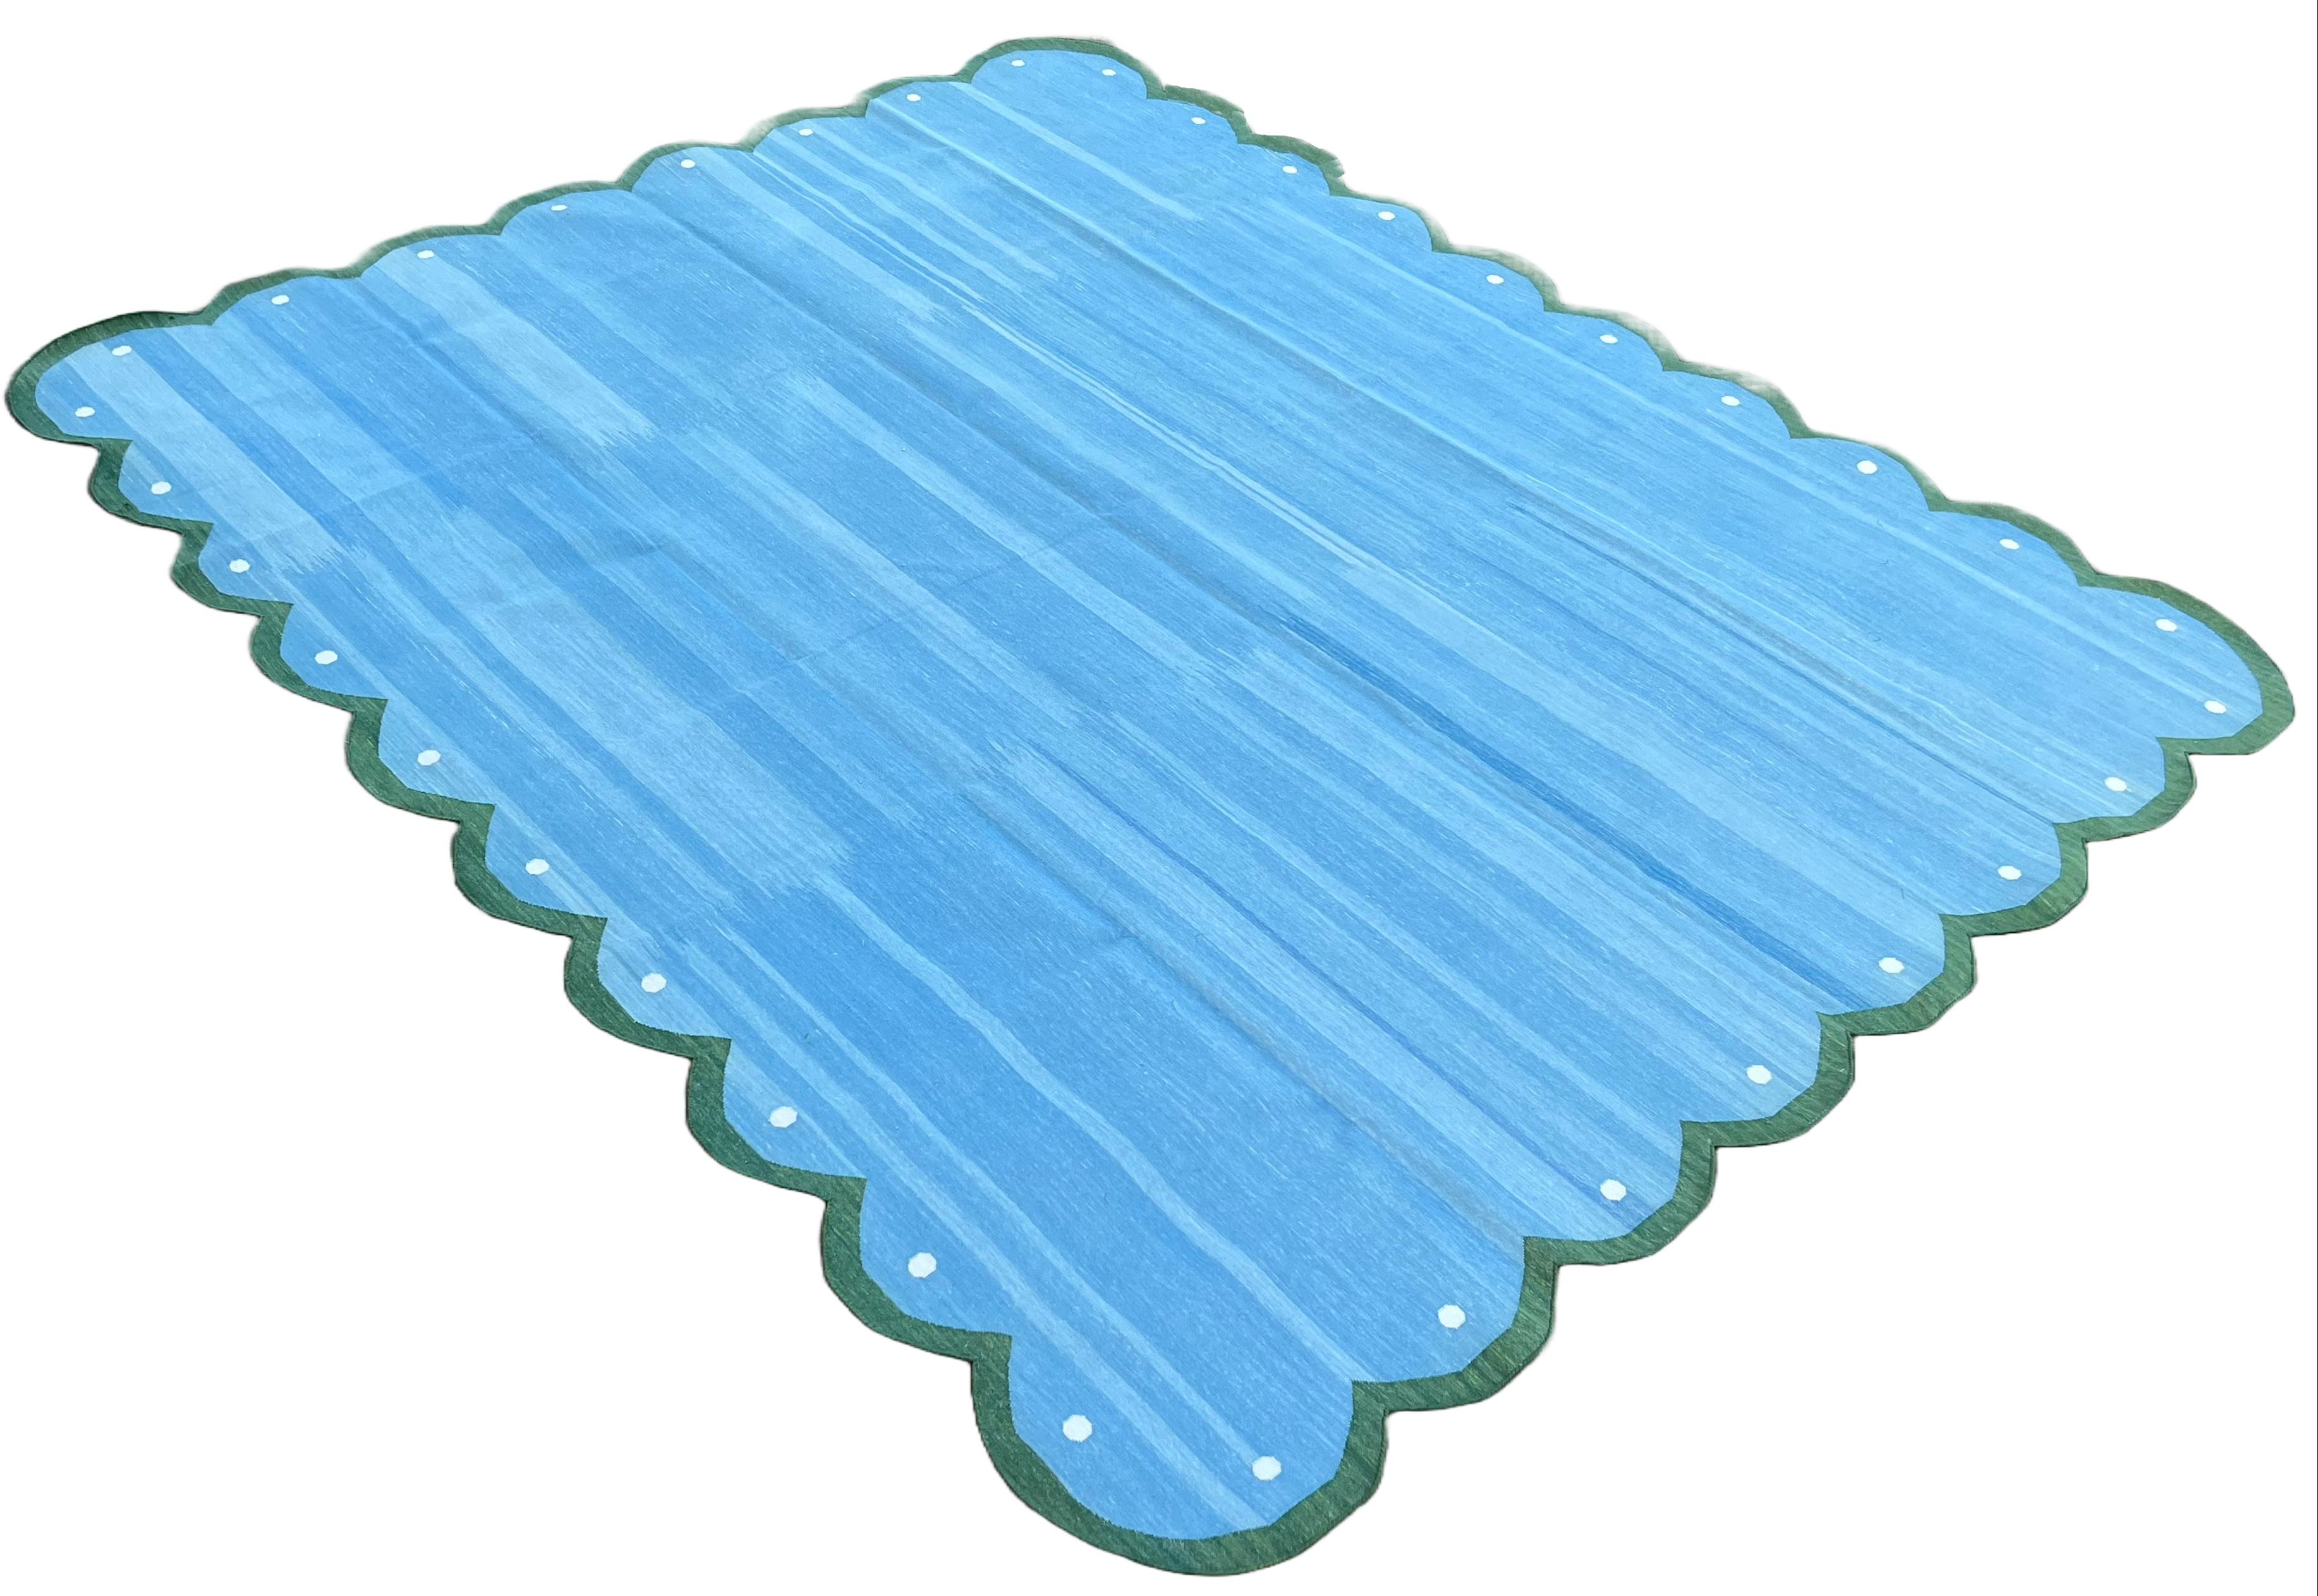 Cotton Vegetable Dyed Forest Sky Blue & Green Four Sided Scalloped Rug-8'x10' (Scallops runs all 4 Sides)
These special flat-weave dhurries are hand-woven with 15 ply 100% cotton yarn. Due to the special manufacturing techniques used to create our